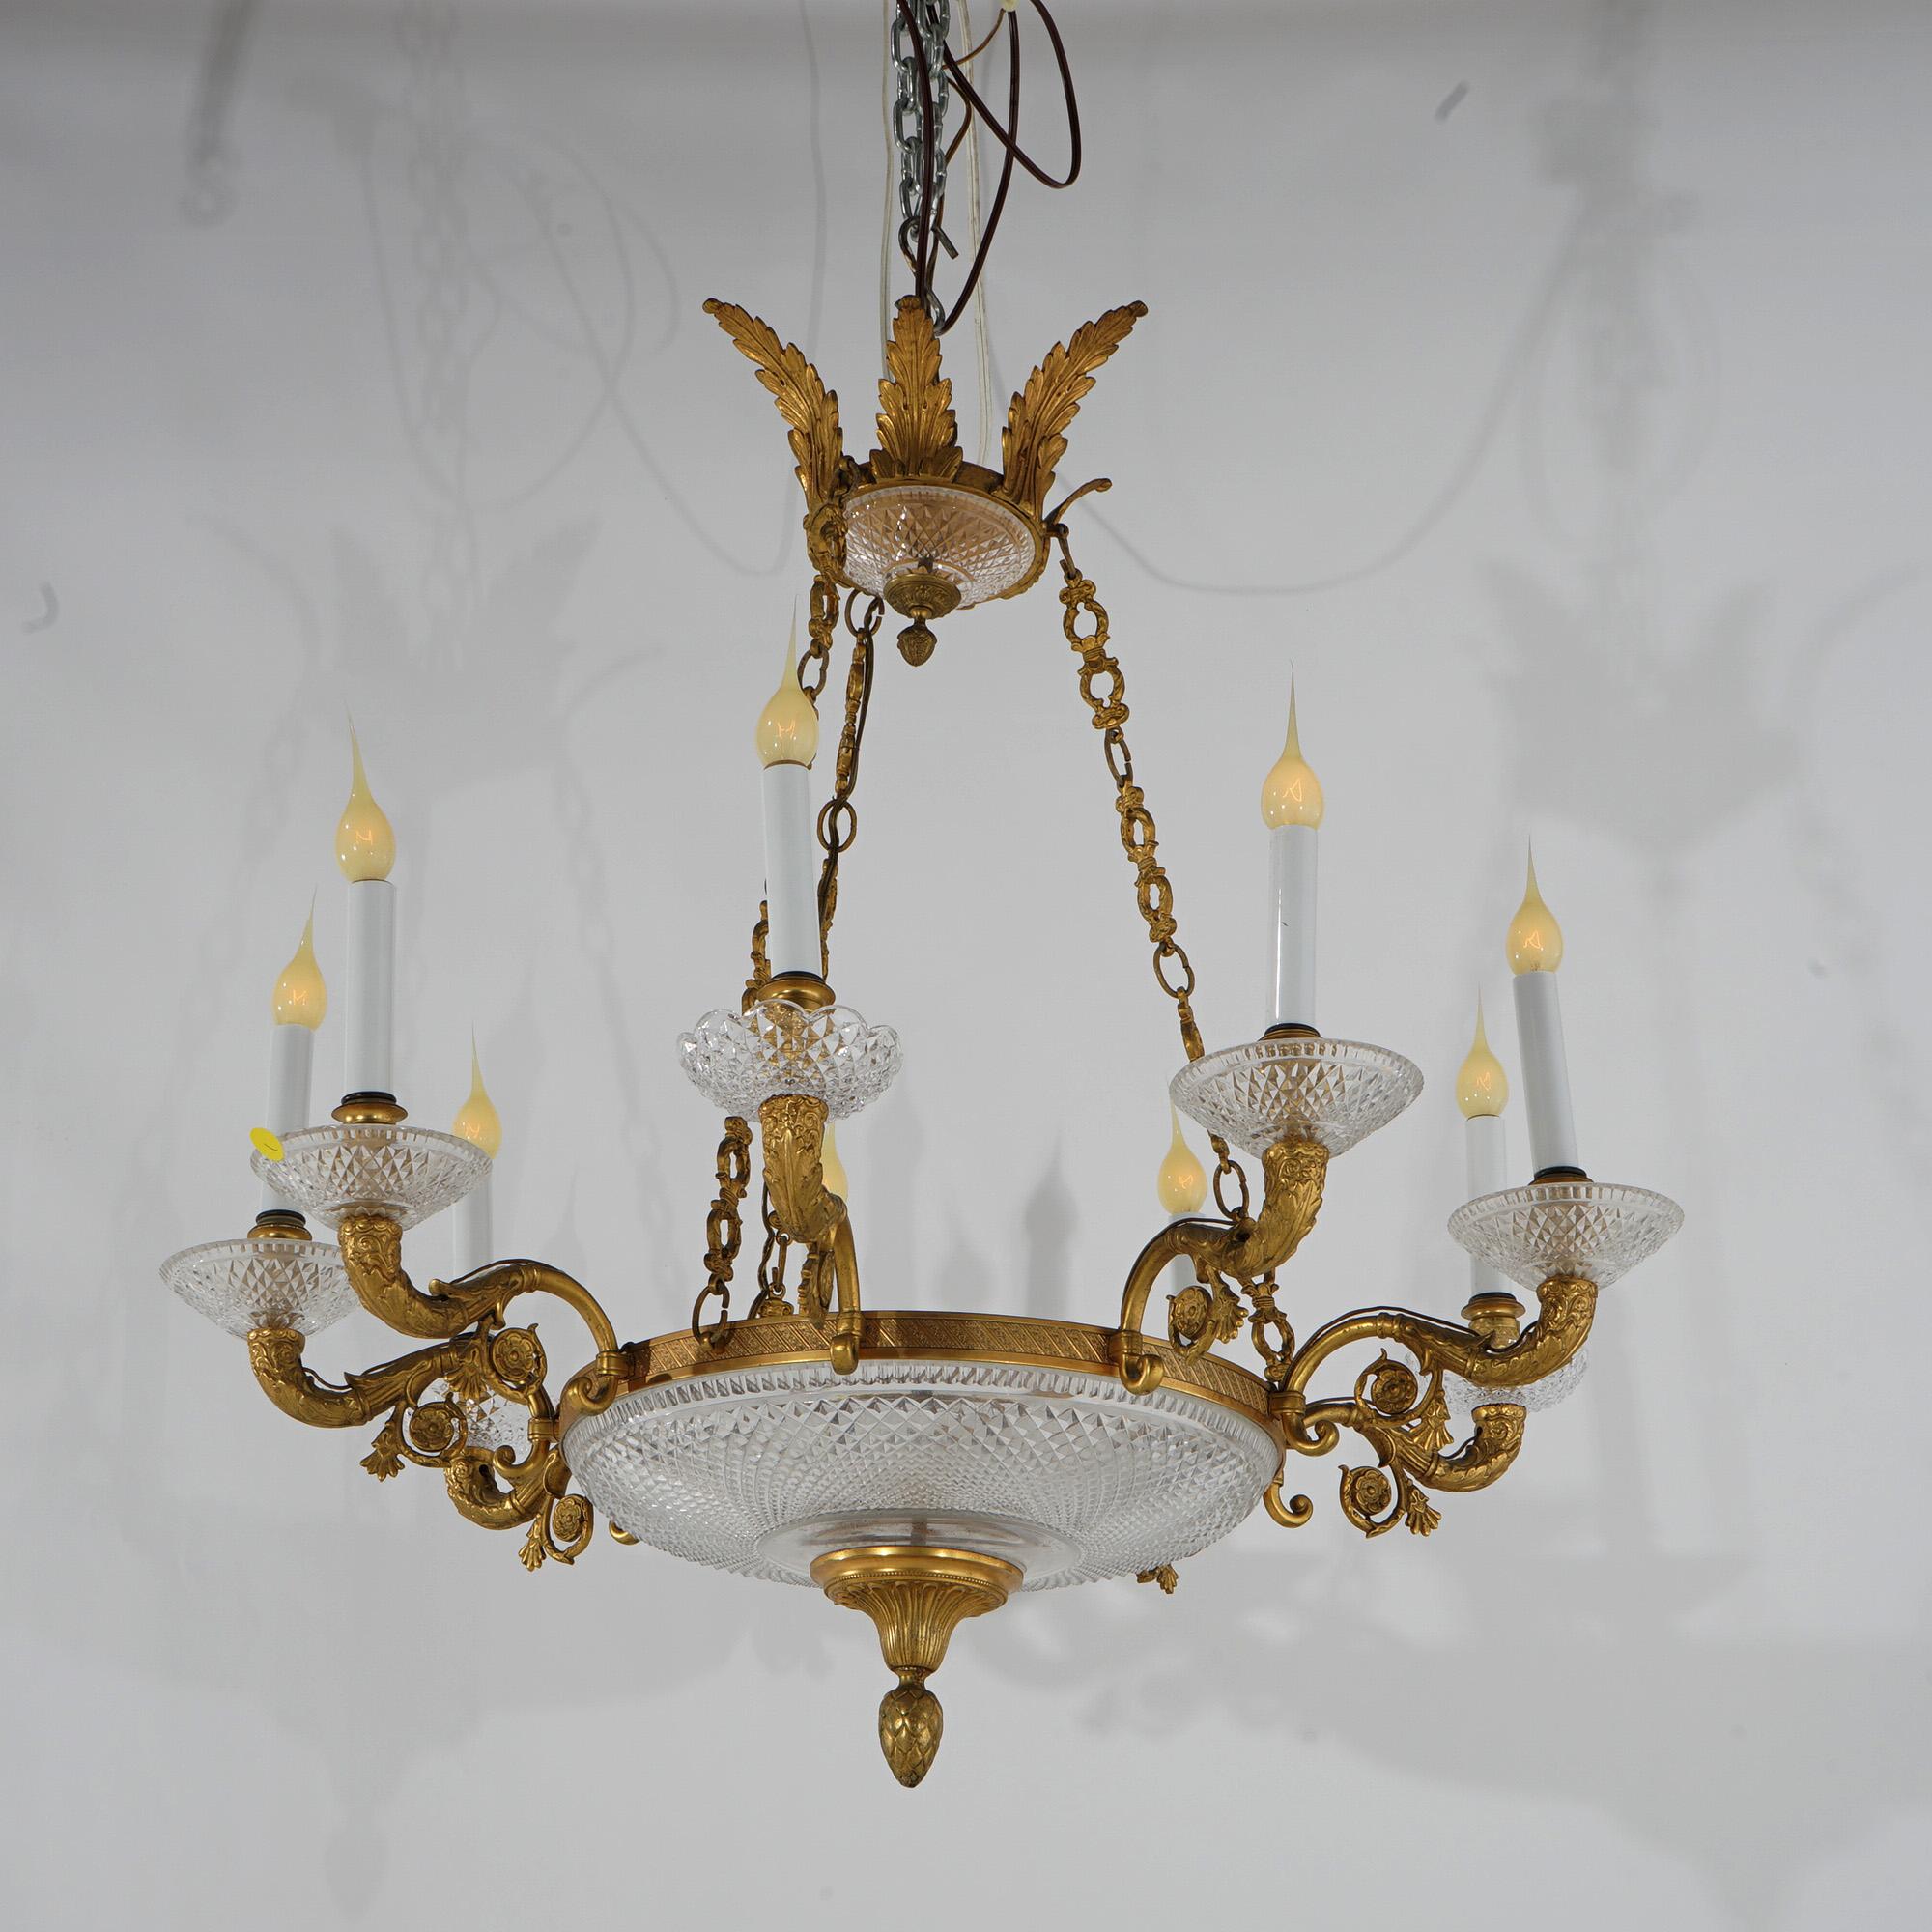 Antique French Louis XIV Style Gilt Bronze & Crystal Nine-Light Chandelier For Sale 7